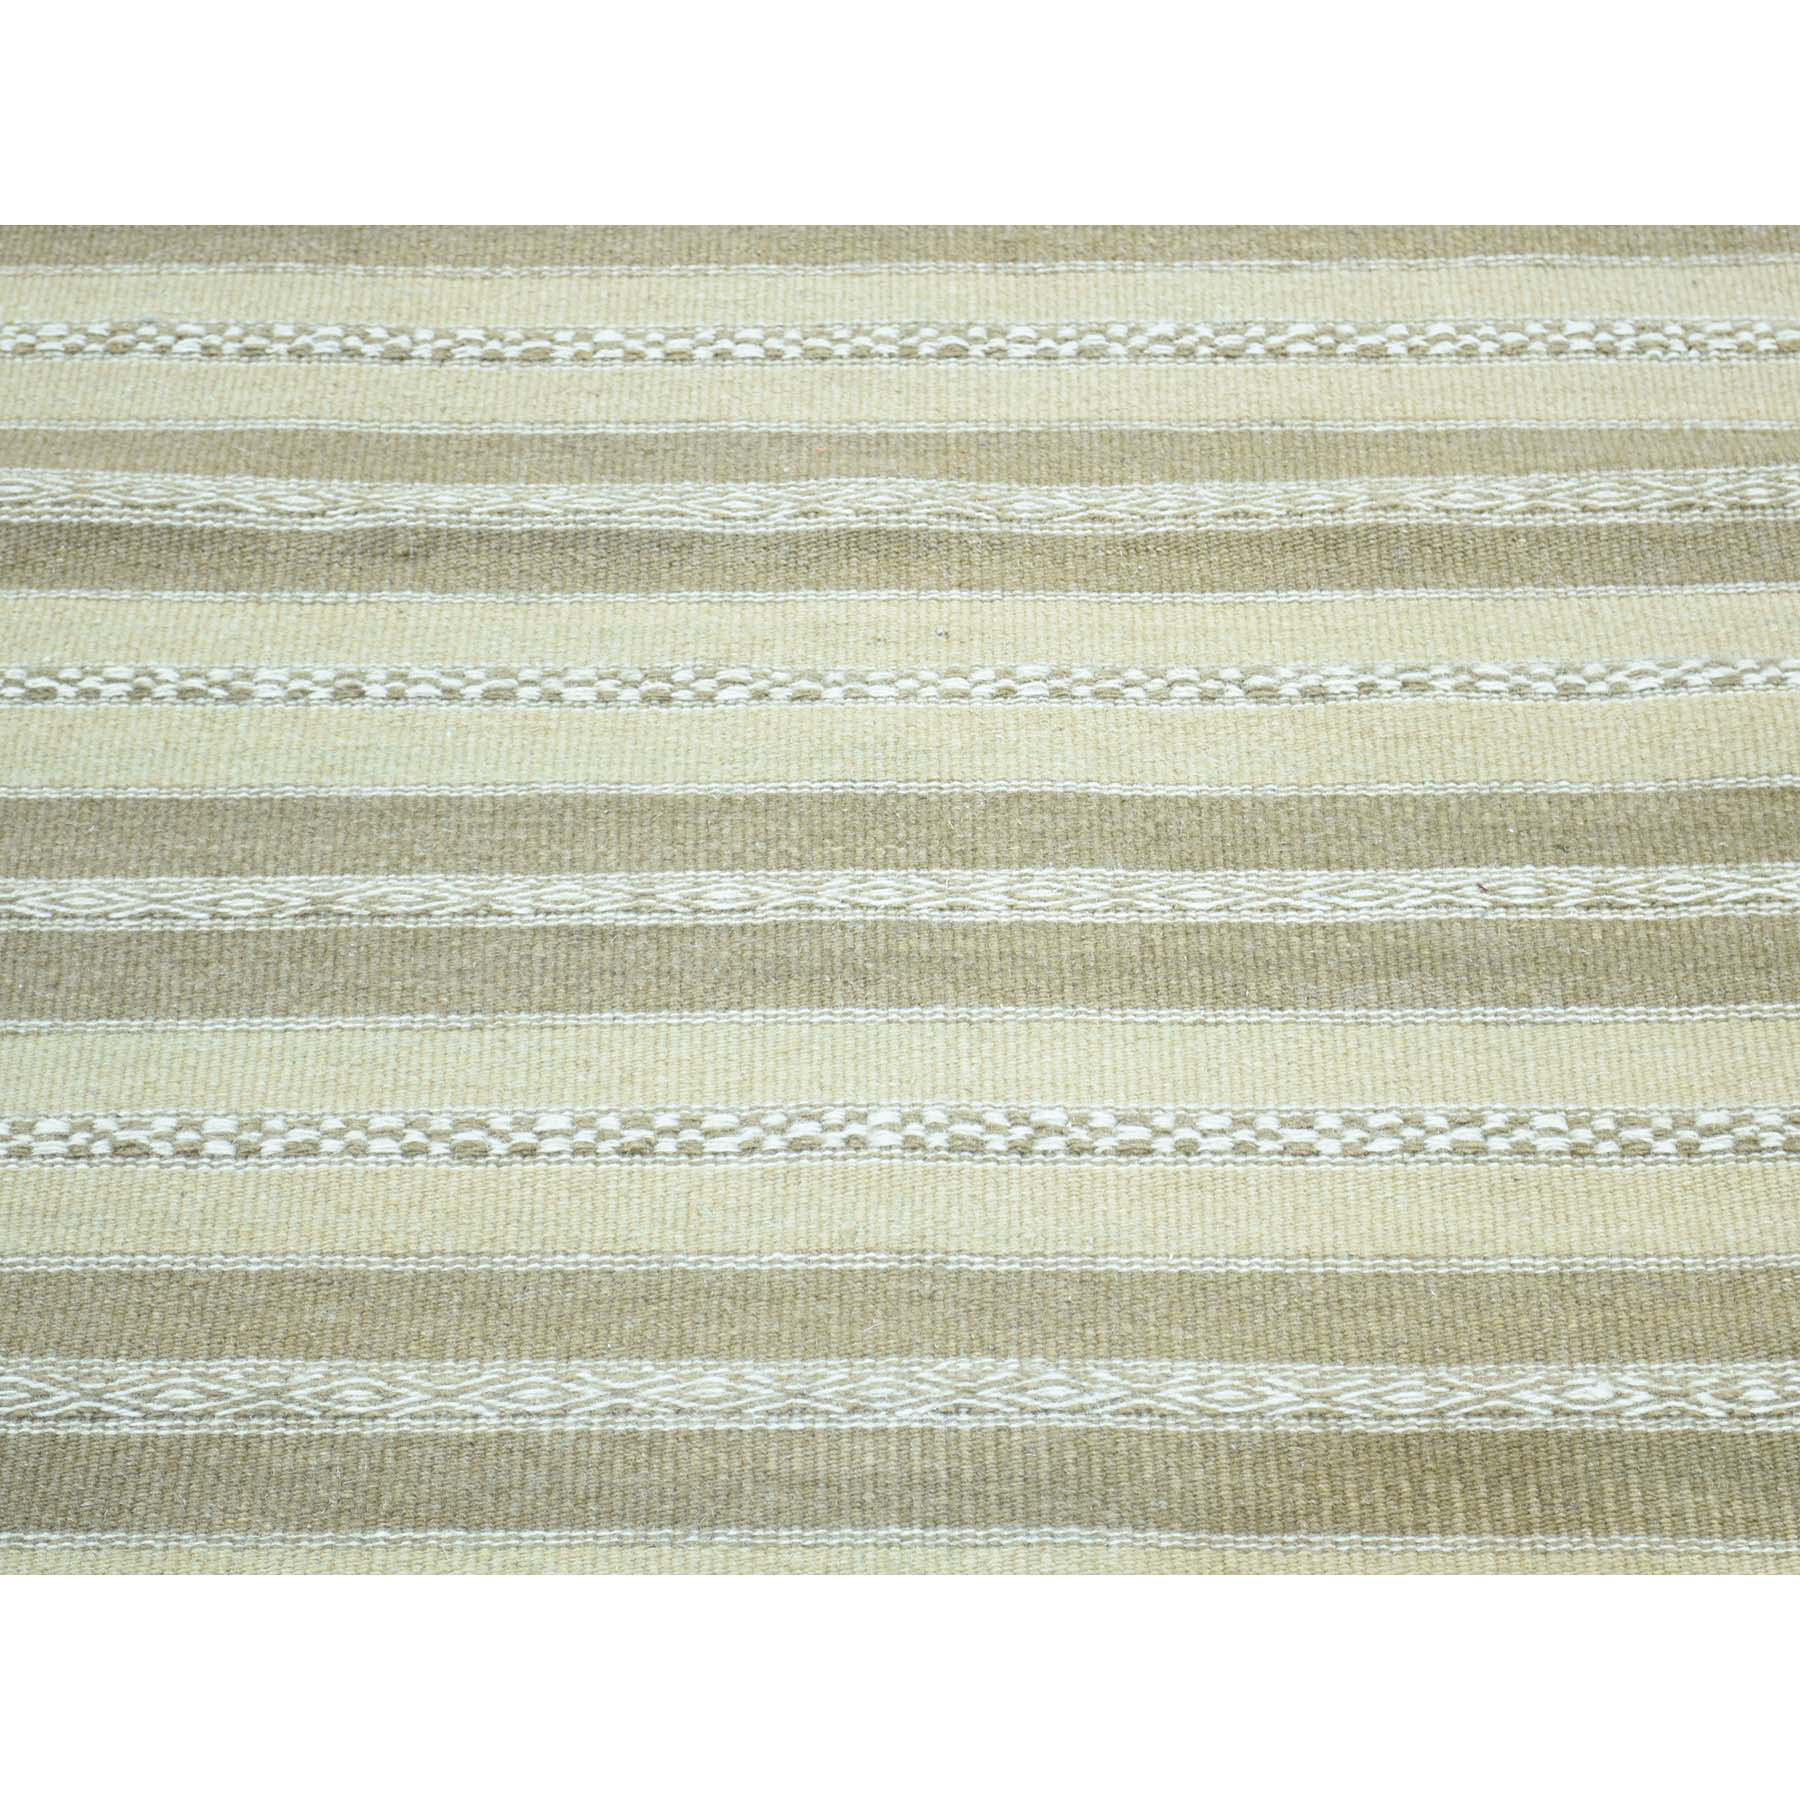 2-9 x4-10  Hand-Woven Durie Kilim Pure Wool Flat Weave Striped Rug 